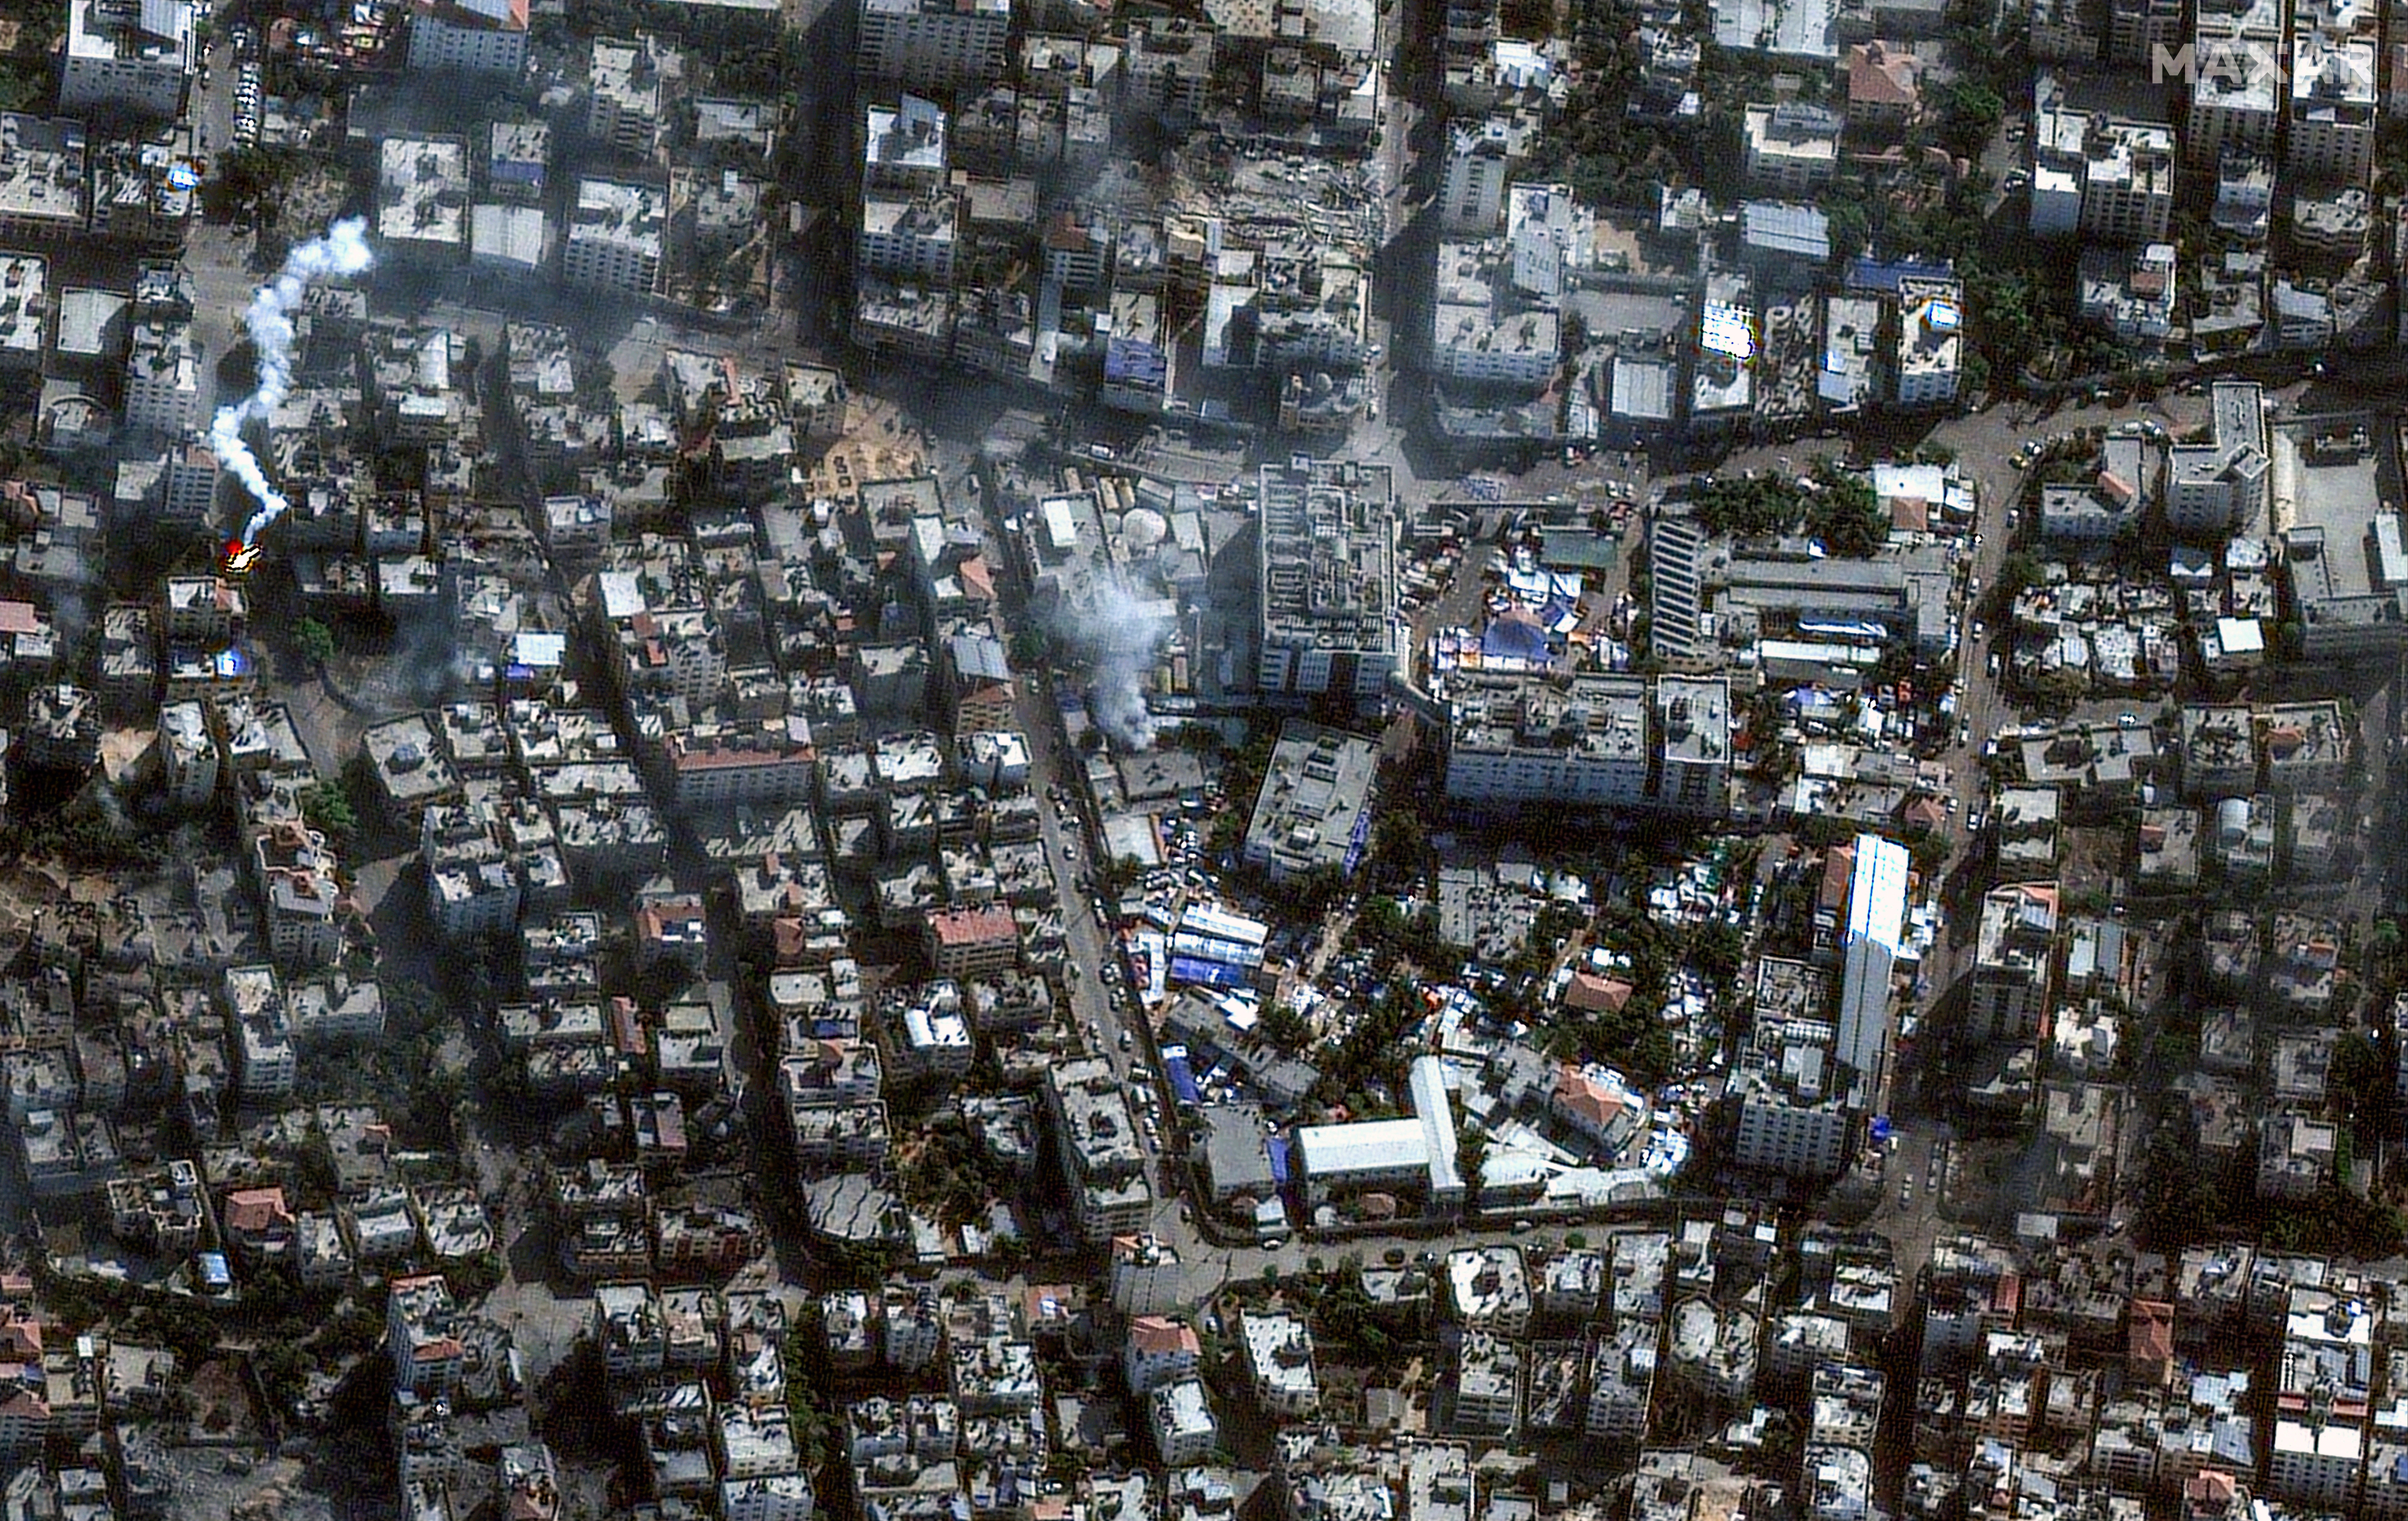 Satellite imagery showed al-Shifa Hospital and its surroundings in Gaza City